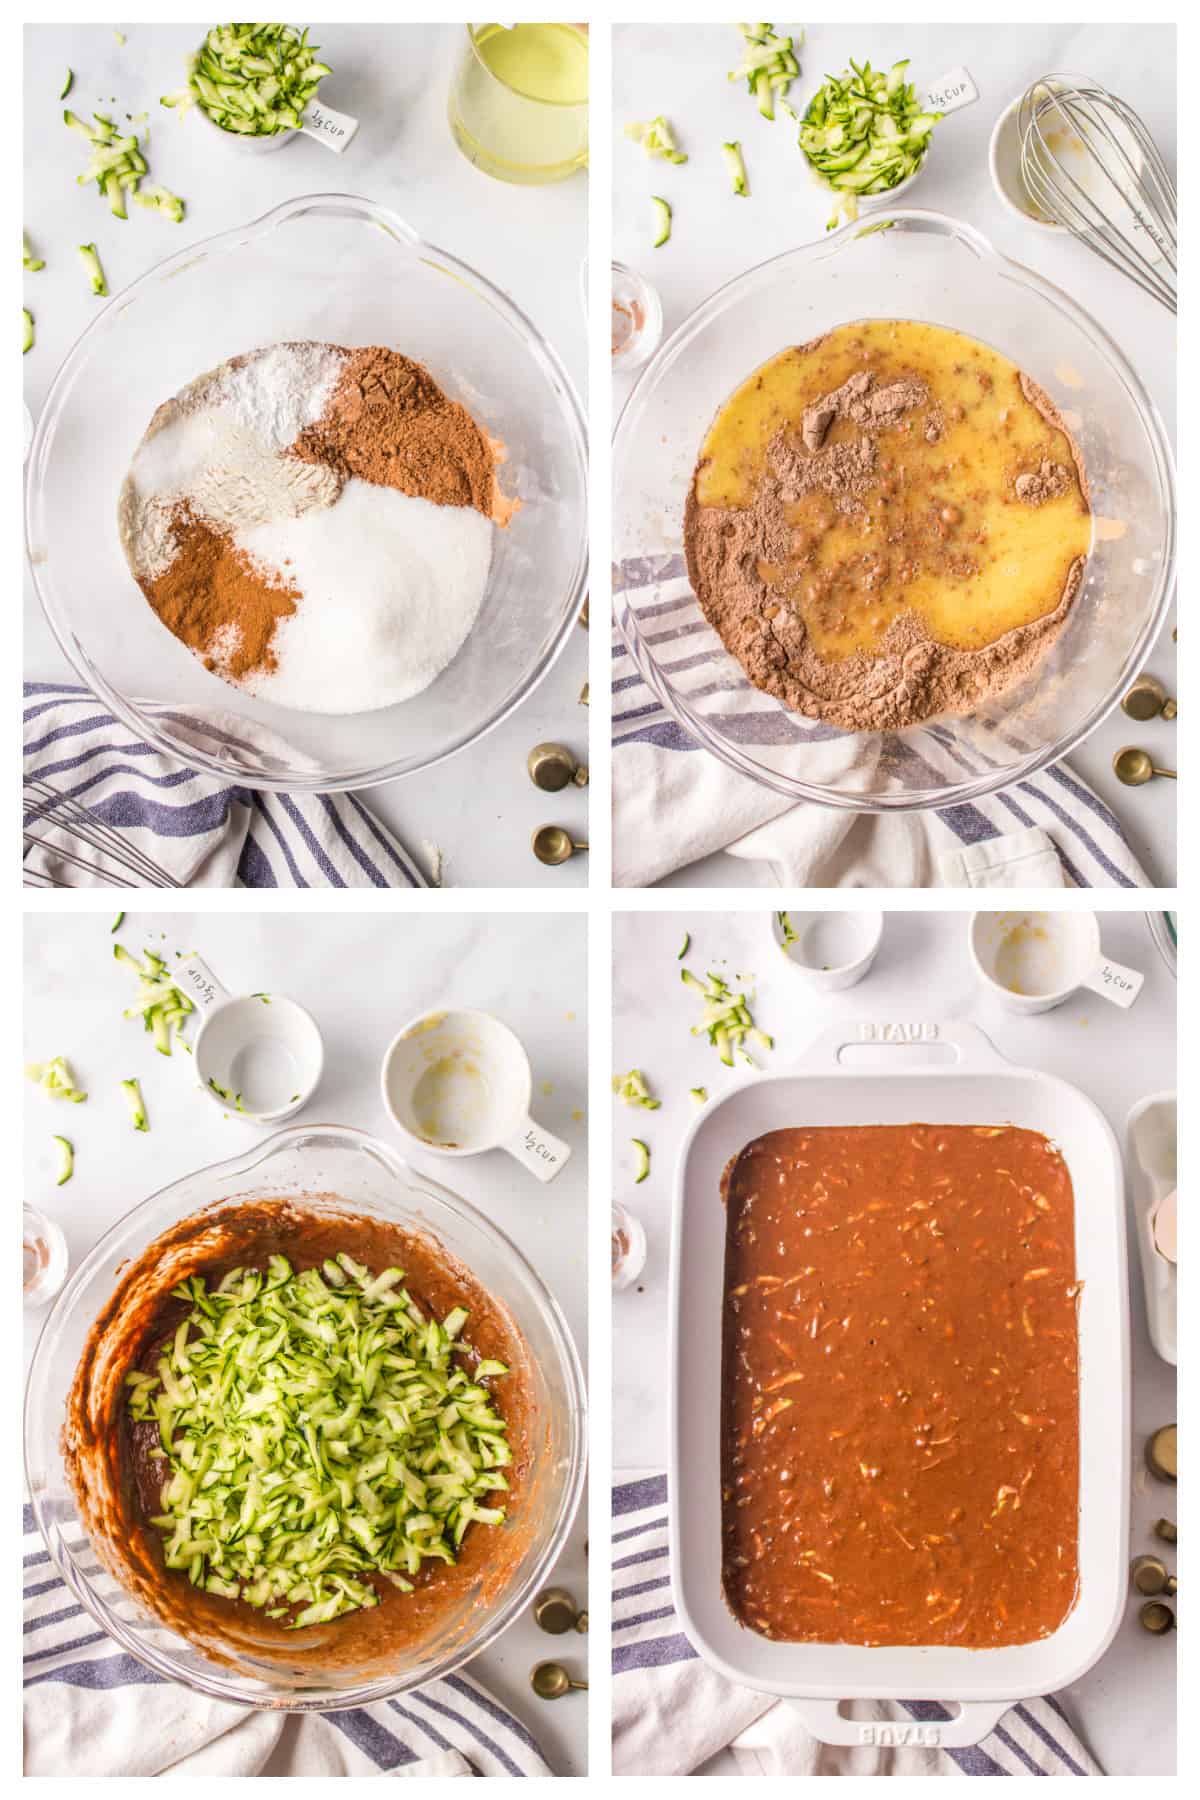 Collage showing how to make chocolate zucchini cake.